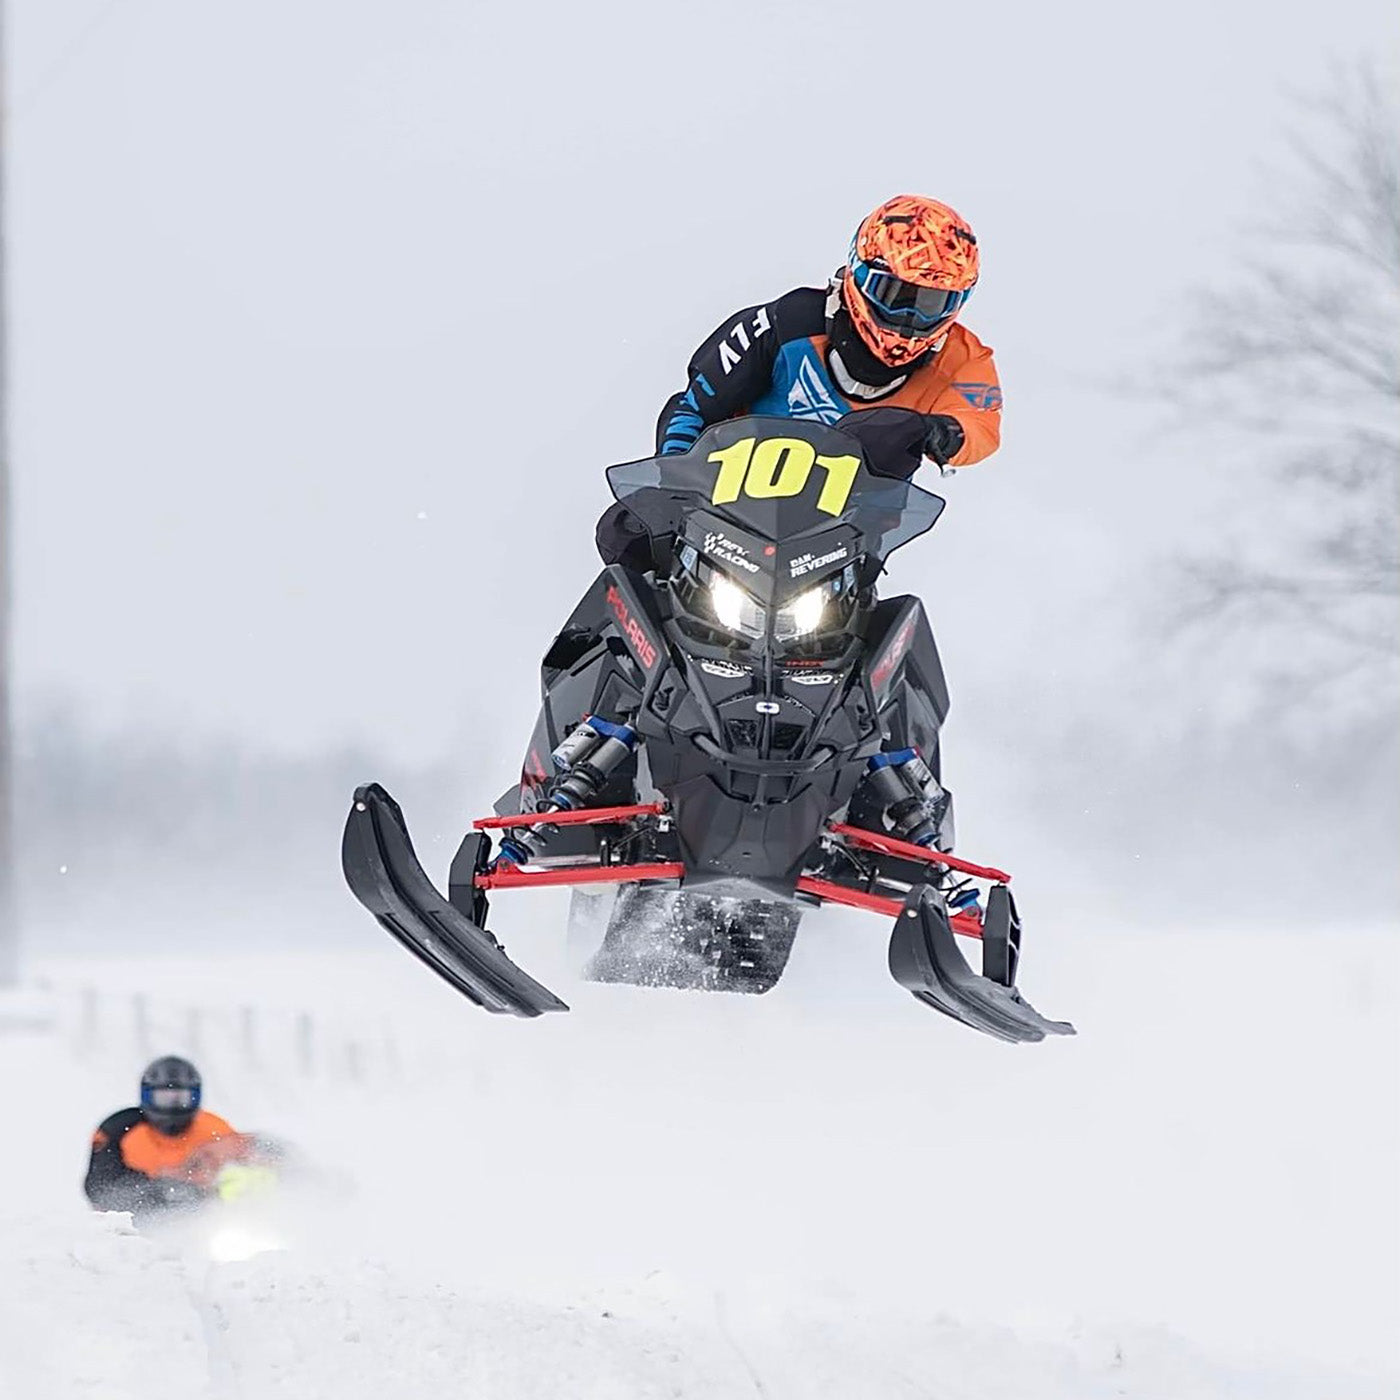 #101 Dan Revering passing Justin Tate in a 2023 race using all-black C&A Pro skis. 